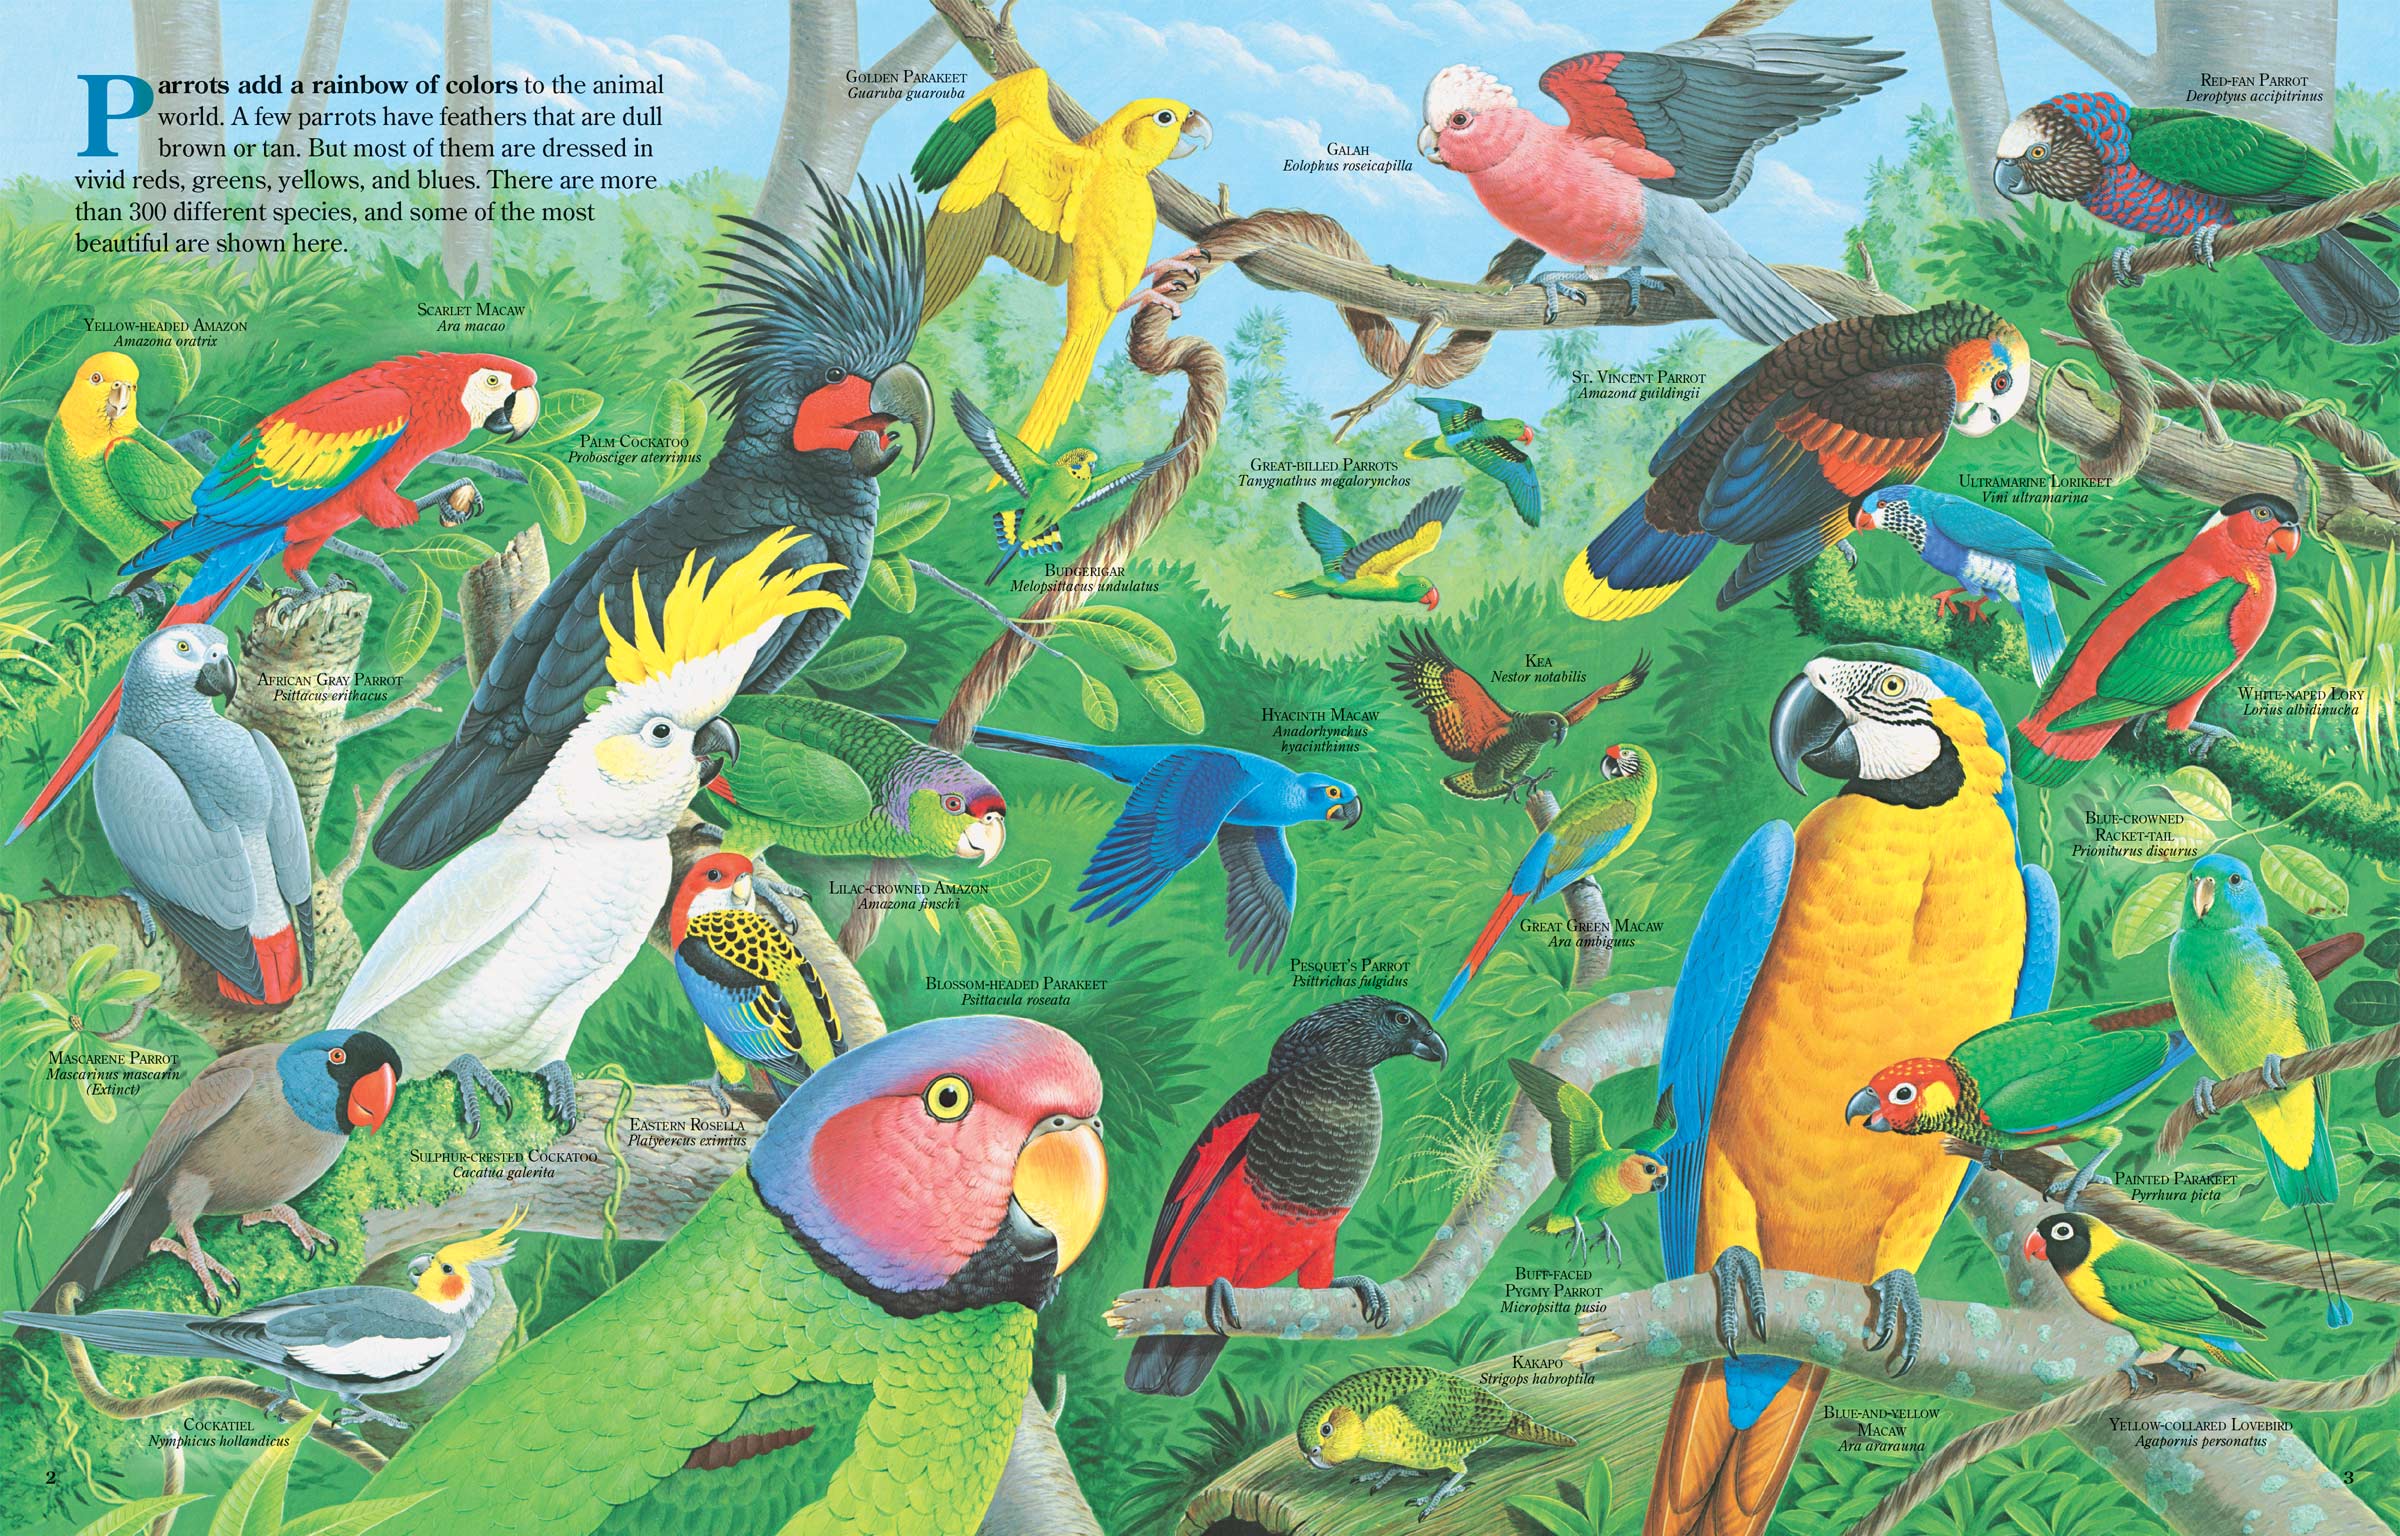 Pages showing many different types of parrots